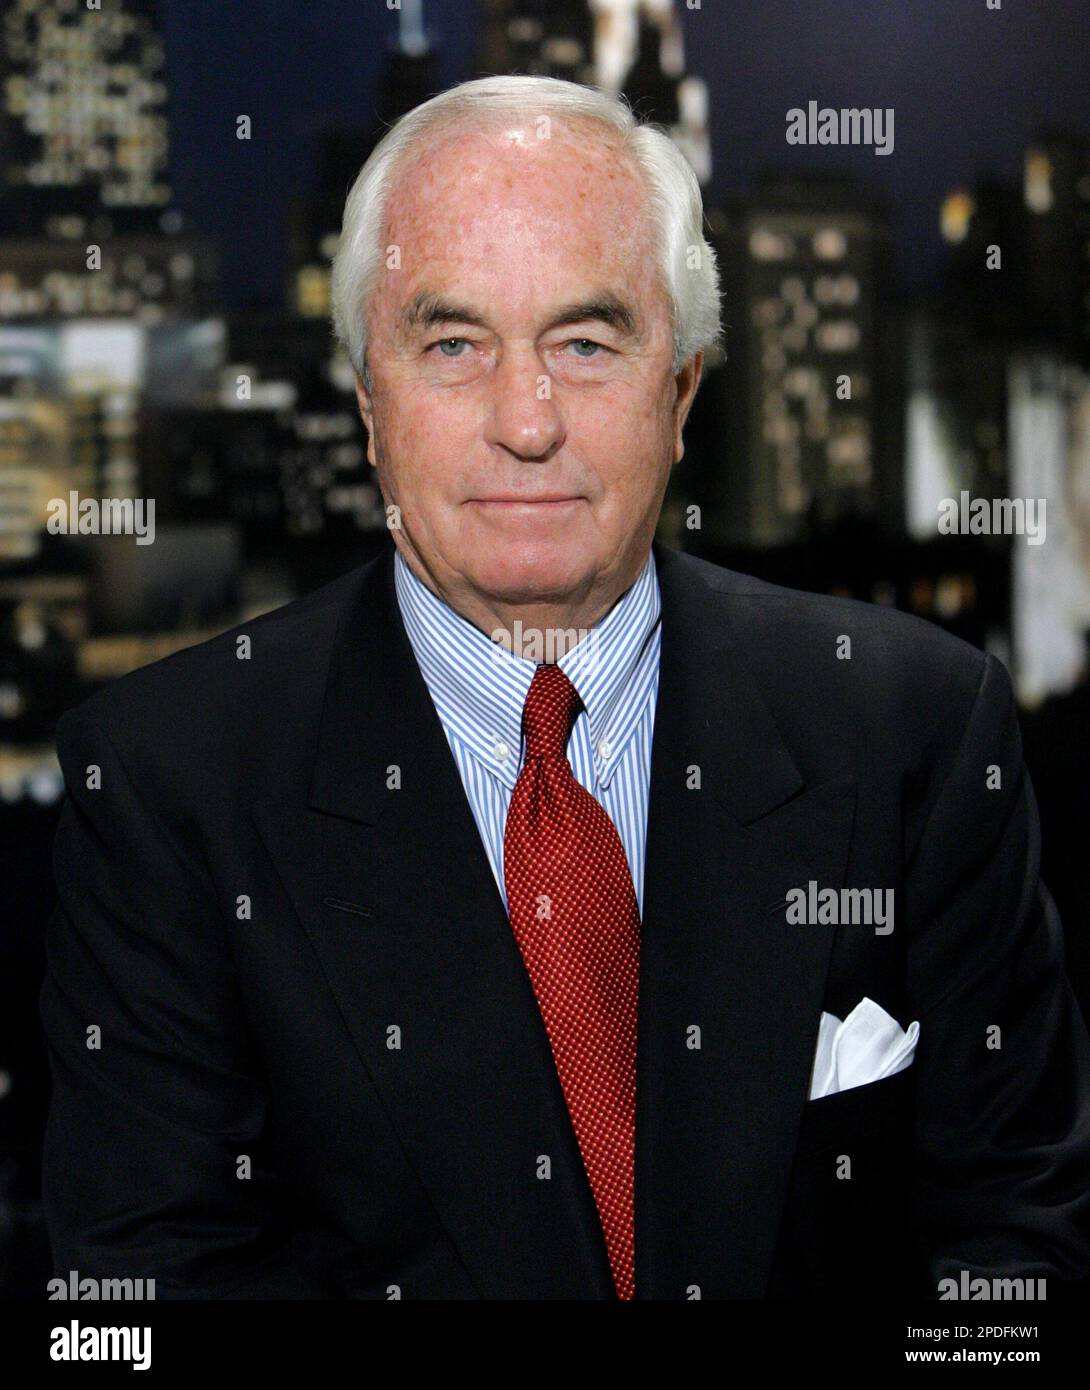 https://c8.alamy.com/comp/2PDFKW1/roger-penske-is-shown-during-an-interview-with-the-associated-press-in-detroit-jan-3-2006-penskes-latest-project-is-leading-detroits-preparations-for-next-months-super-bowl-as-chairman-of-the-host-committee-he-has-ultimate-responsibility-for-the-public-festivities-and-logistics-surrounding-the-game-all-part-of-the-weighty-task-of-polishing-detroits-long-tarnished-image-in-the-eyes-of-the-world-ap-photopaul-sancya-2PDFKW1.jpg